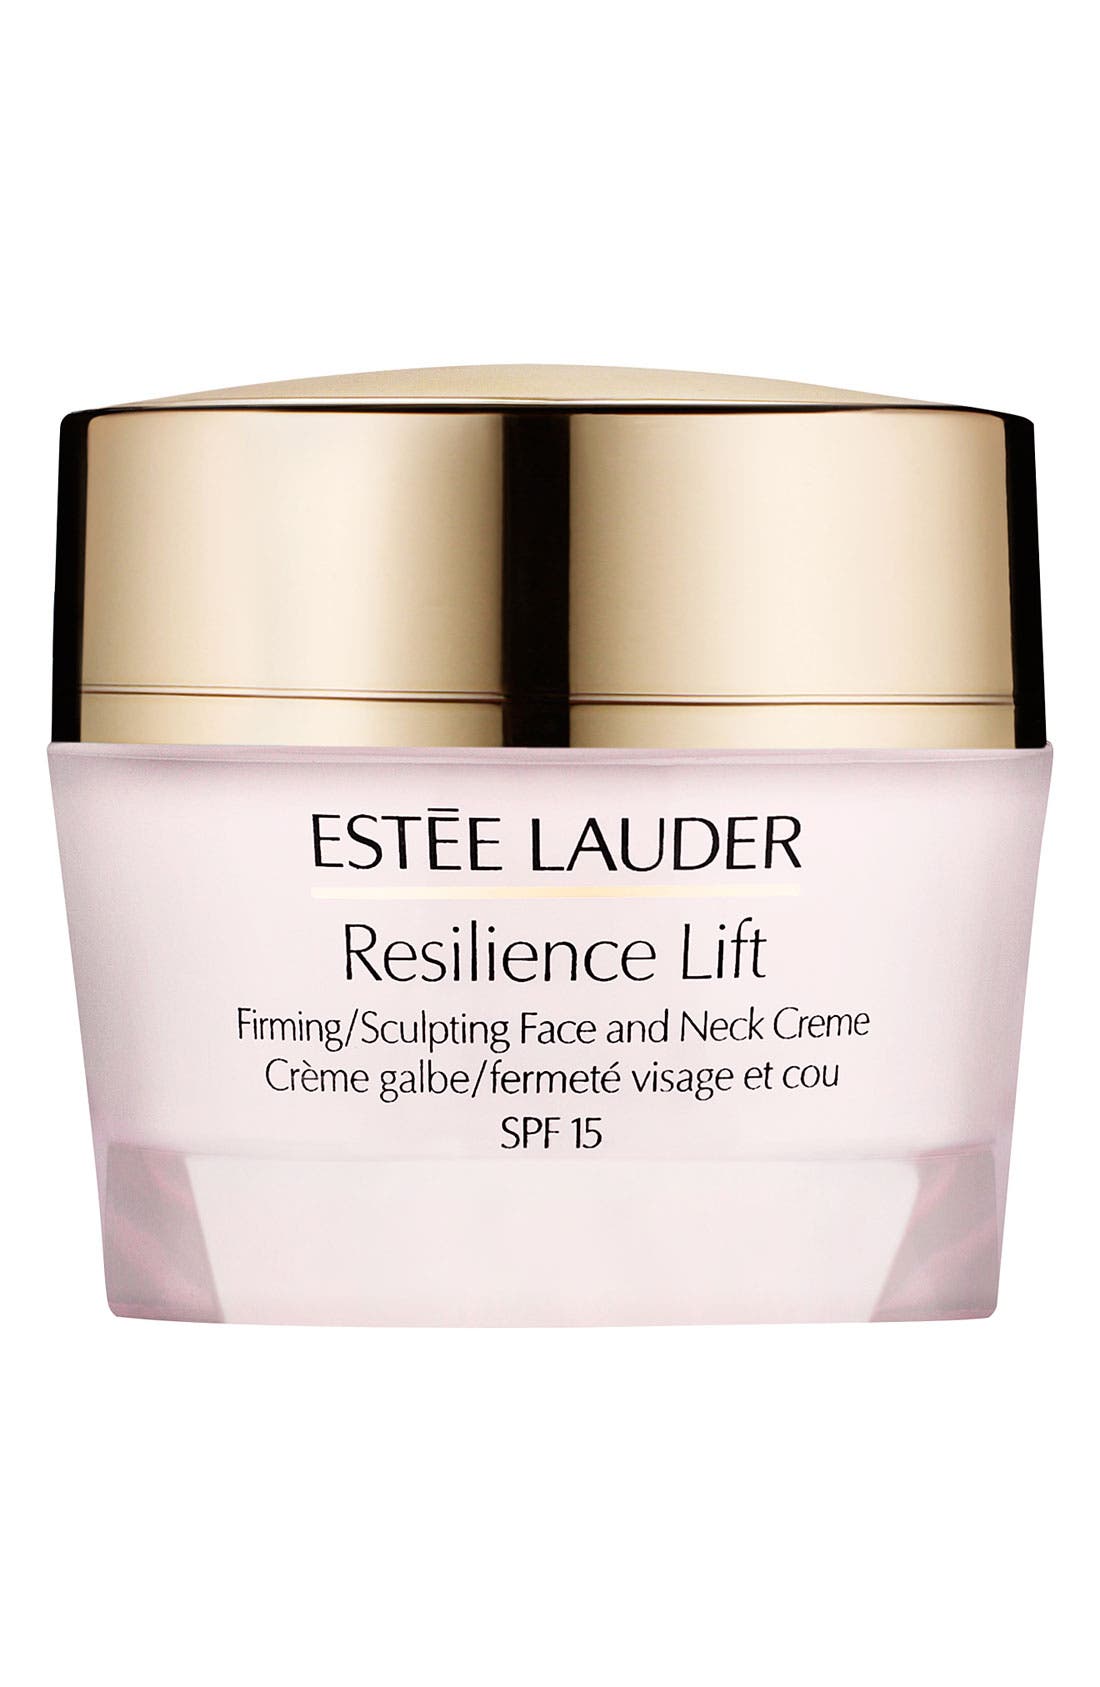 UPC 027131829416 product image for Estee Lauder 'Resilience Lift' Firming/Sculpting Face and Neck Creme Broad Spect | upcitemdb.com